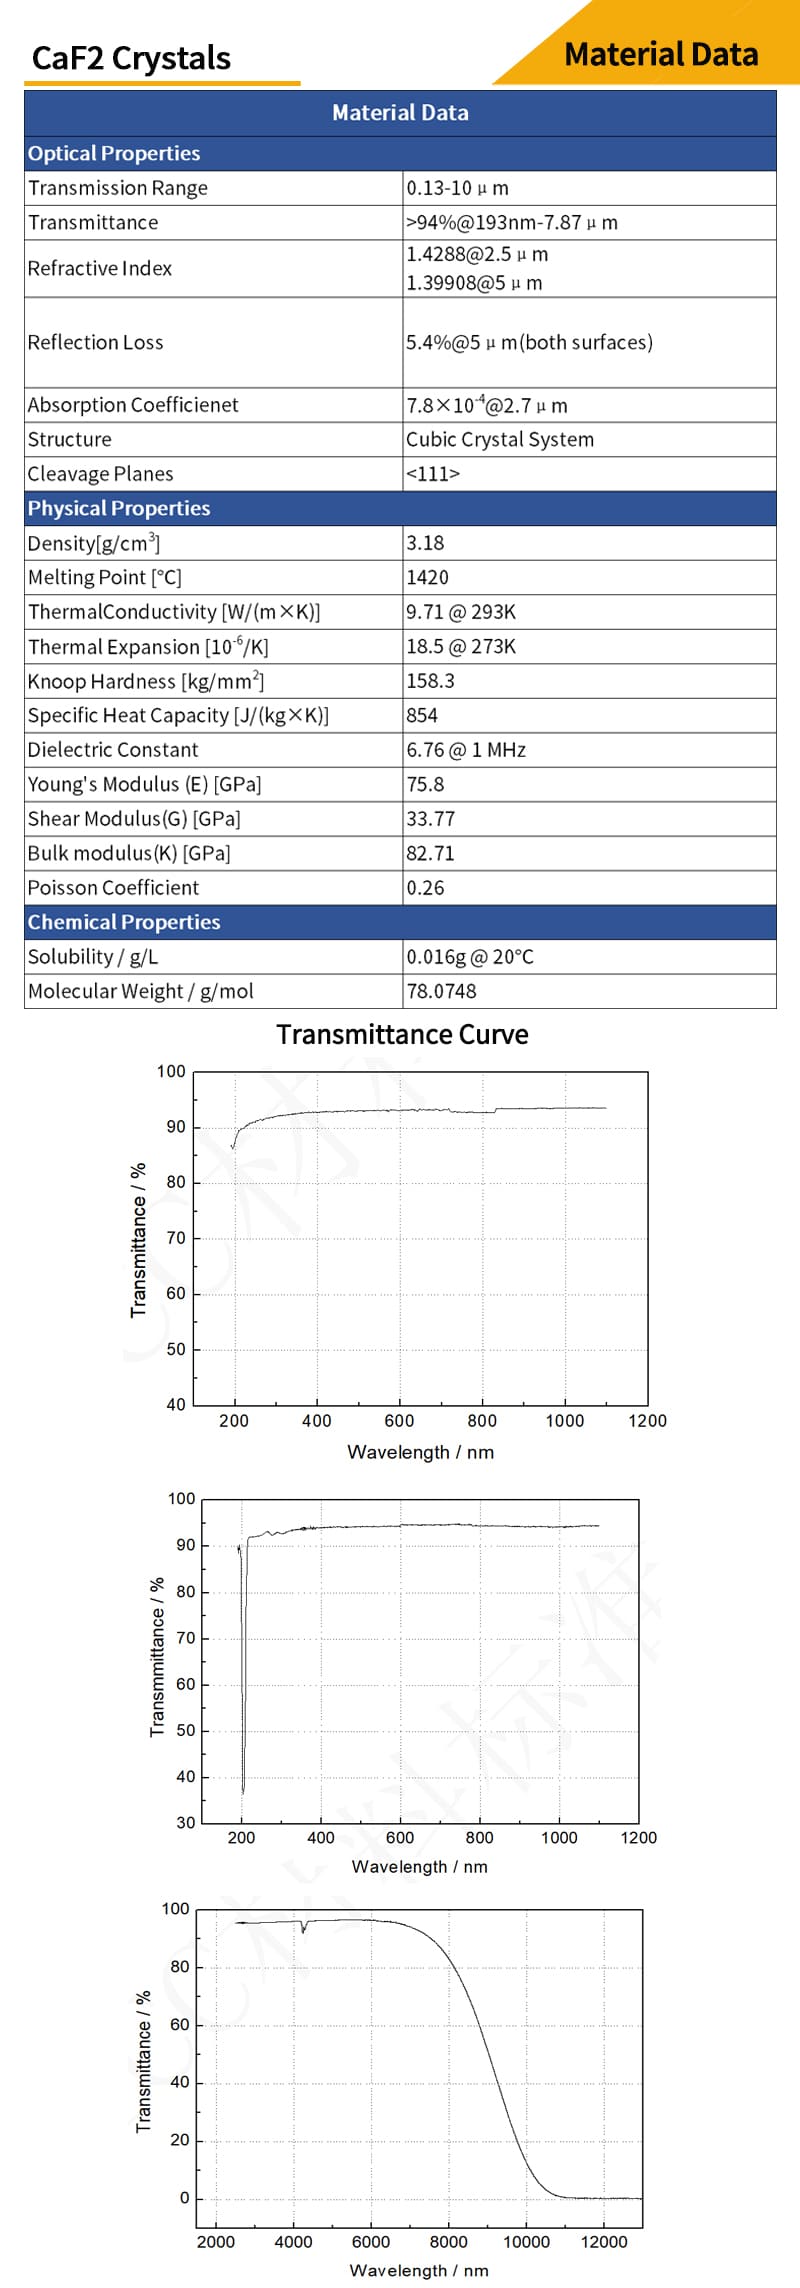 Calcium Fluoride plano-concave lenses material data and transmittance curves